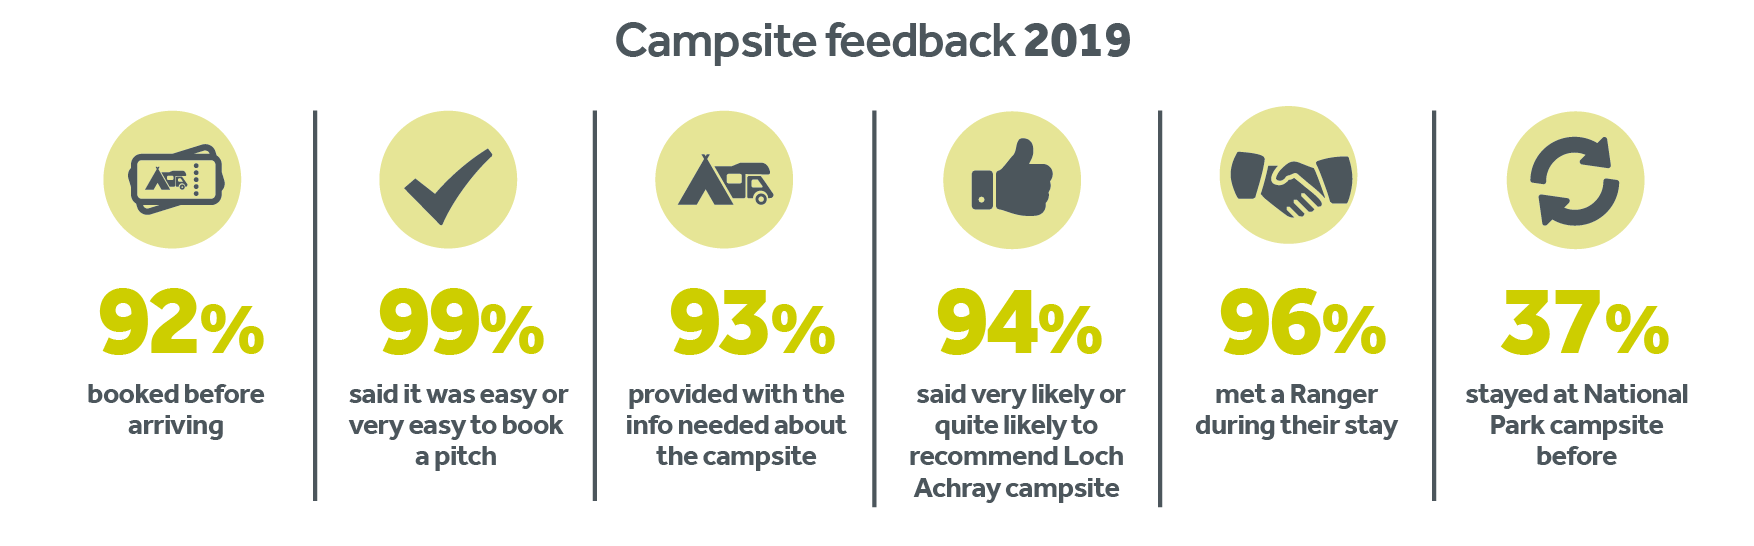 infographic-showing-92%-booked-before-arriving-99%-said-it-was-easy-or-very-easy-to-book-a-pitch-93%-provided-with-the-info-needed-about-the-campsite-94%-said-very-likely-or-quite-likely-to-recommend-loch-achray-campsite-96%-met-a-ranger-during-their-stay-37%-stayed-at-a-National-Park-campsite-before